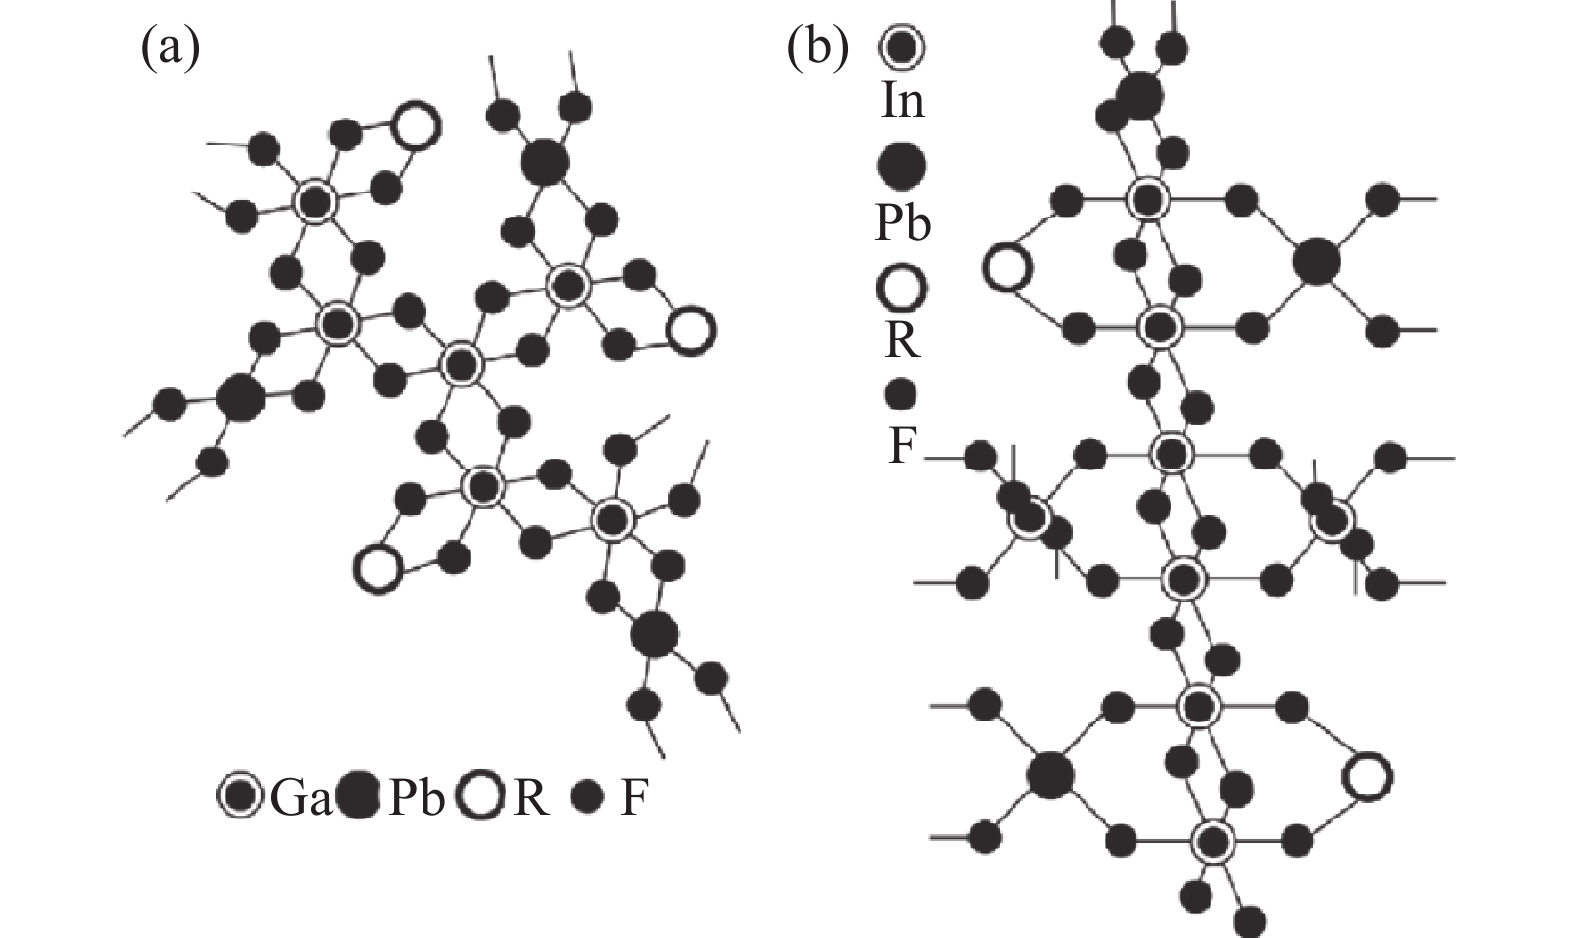 Structure of (a) GaF3-based and (b) InF3-based glasses[27]